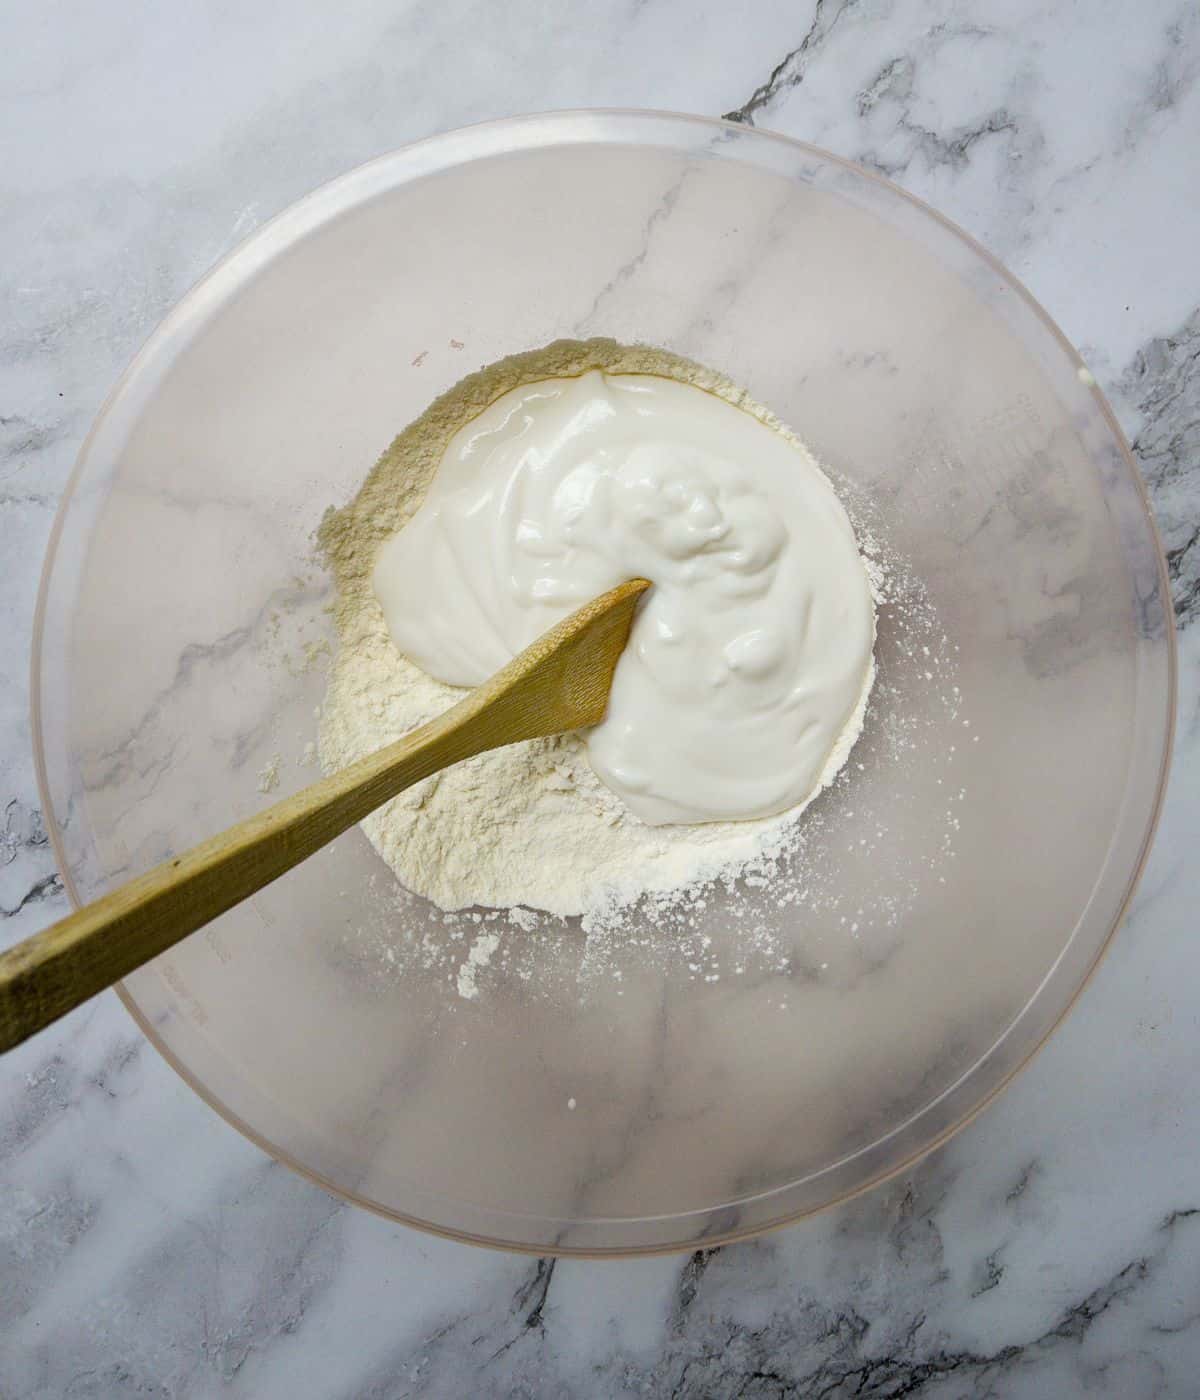 flour and yoghurt being mixed together in a bowl.